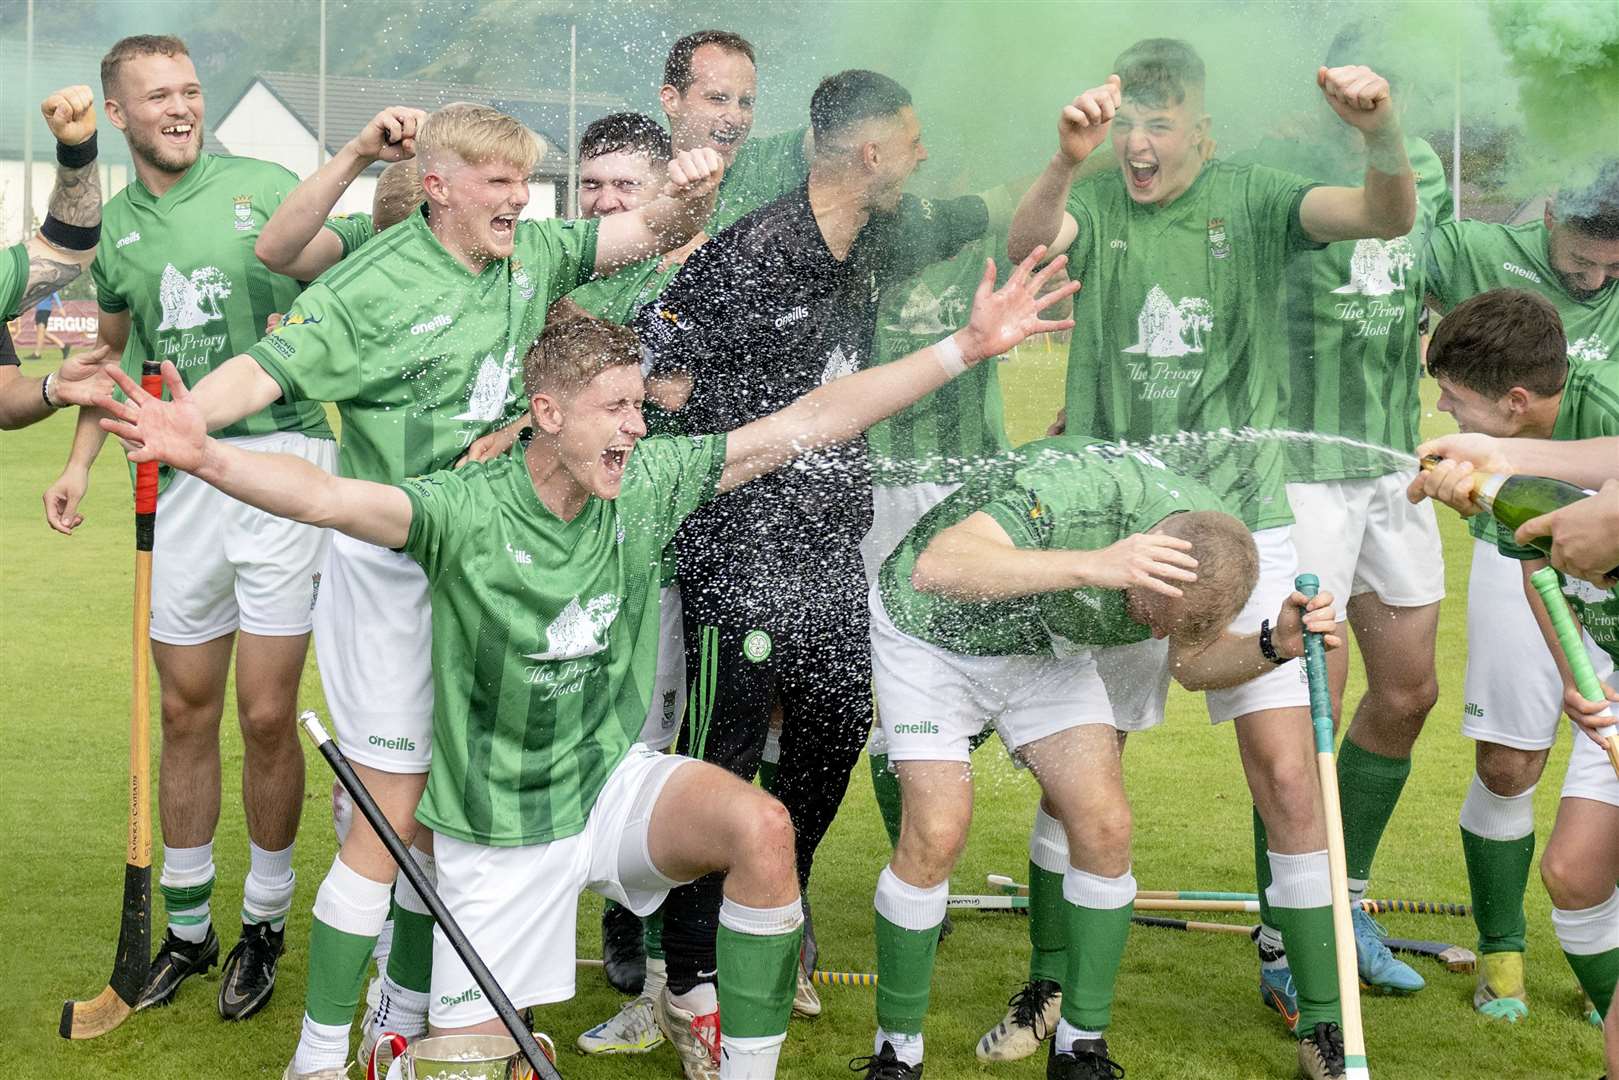 Club captain Conor Ross (front left) hopes more celebrations can follow Beauly’s Balliemore Cup triumph. Picture: Neil Paterson